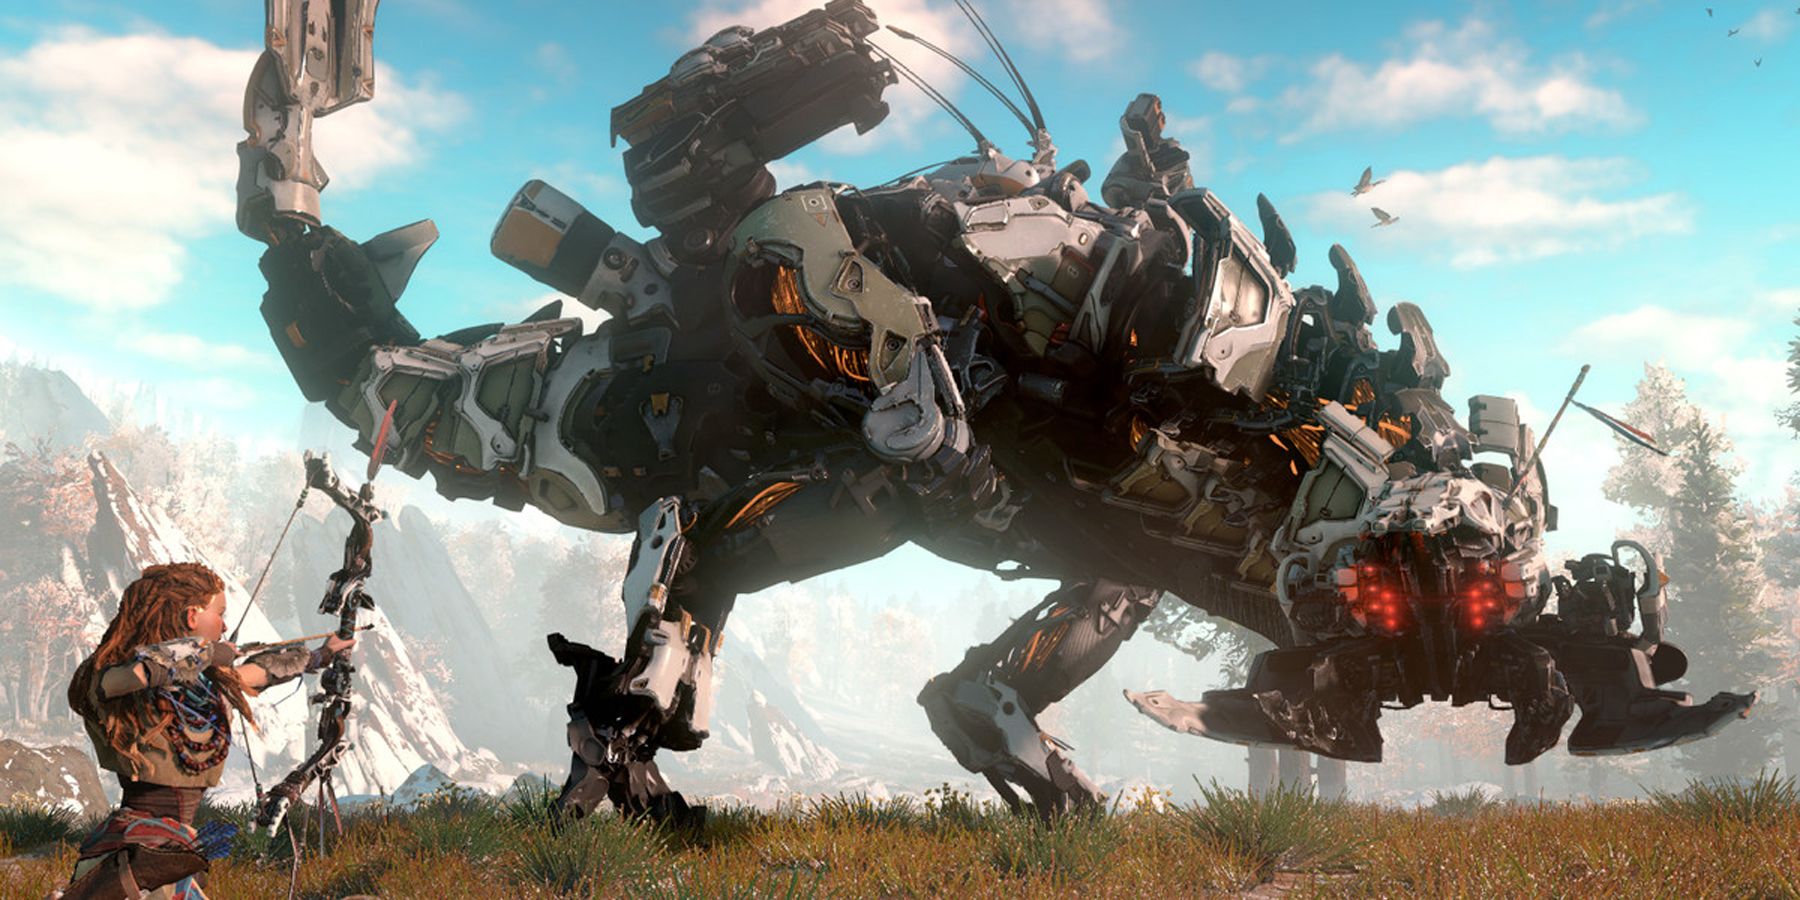 Here's the First Horizon Zero Dawn VR Mod for PC